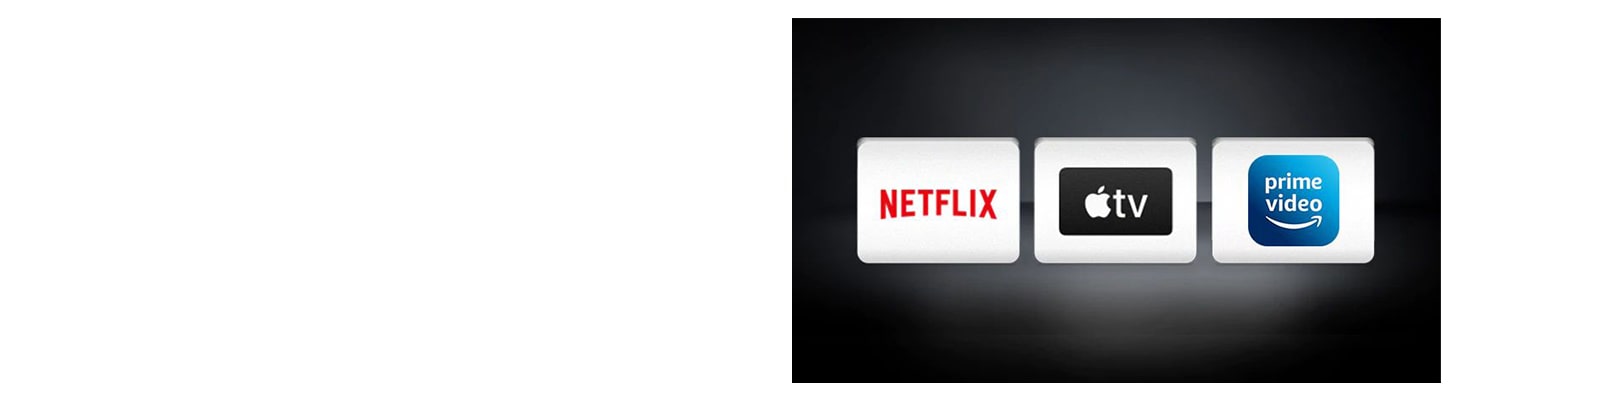 The Netflix logo, the Apple TV logo, and the Amazon Prime Video are arranged horizontally on a black background.